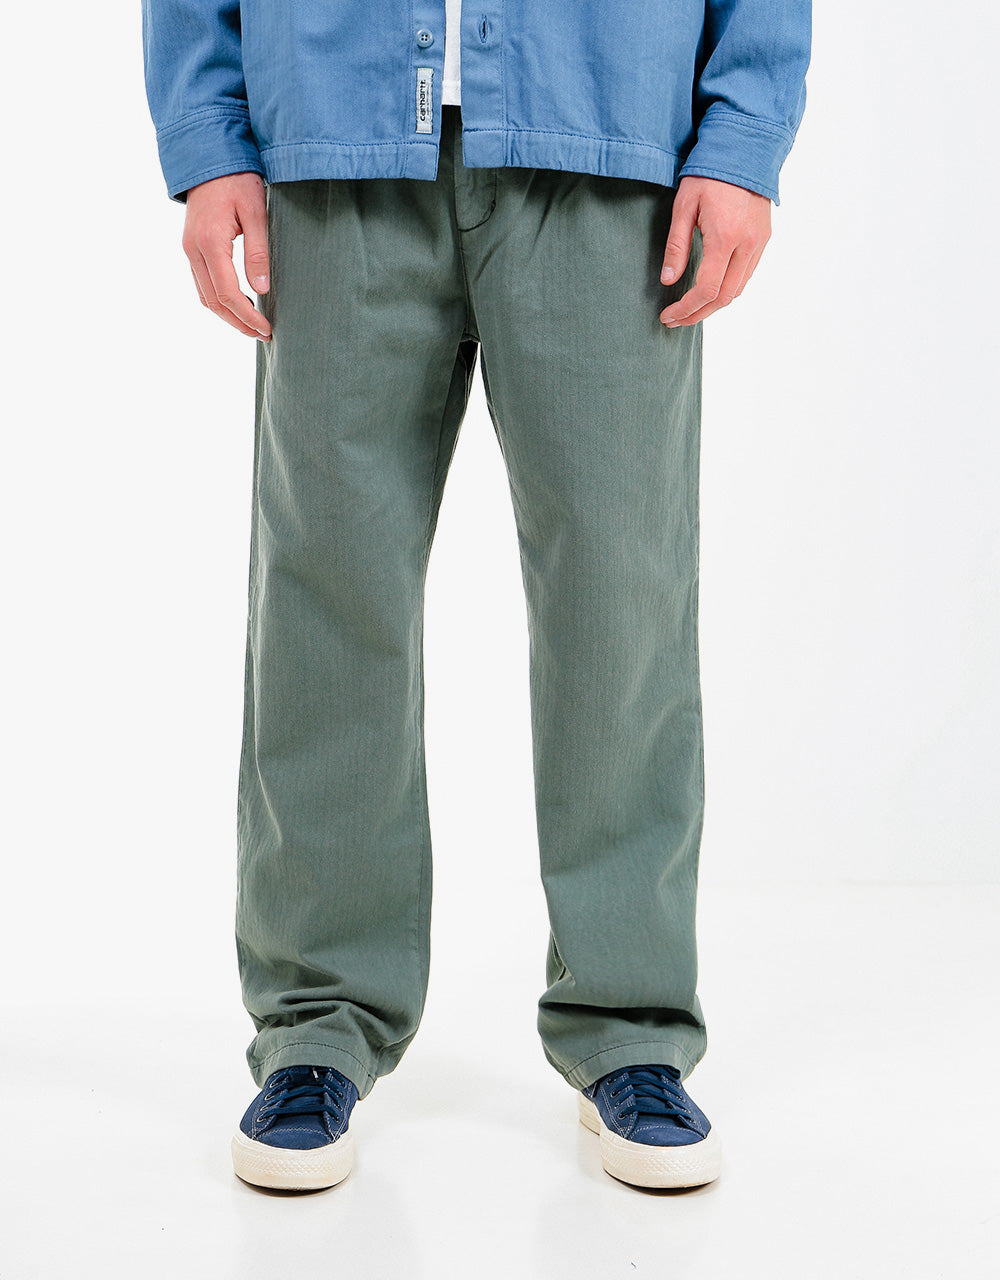 Carhartt WIP Salford Pant - Thyme (Garment Dyed) – Route One